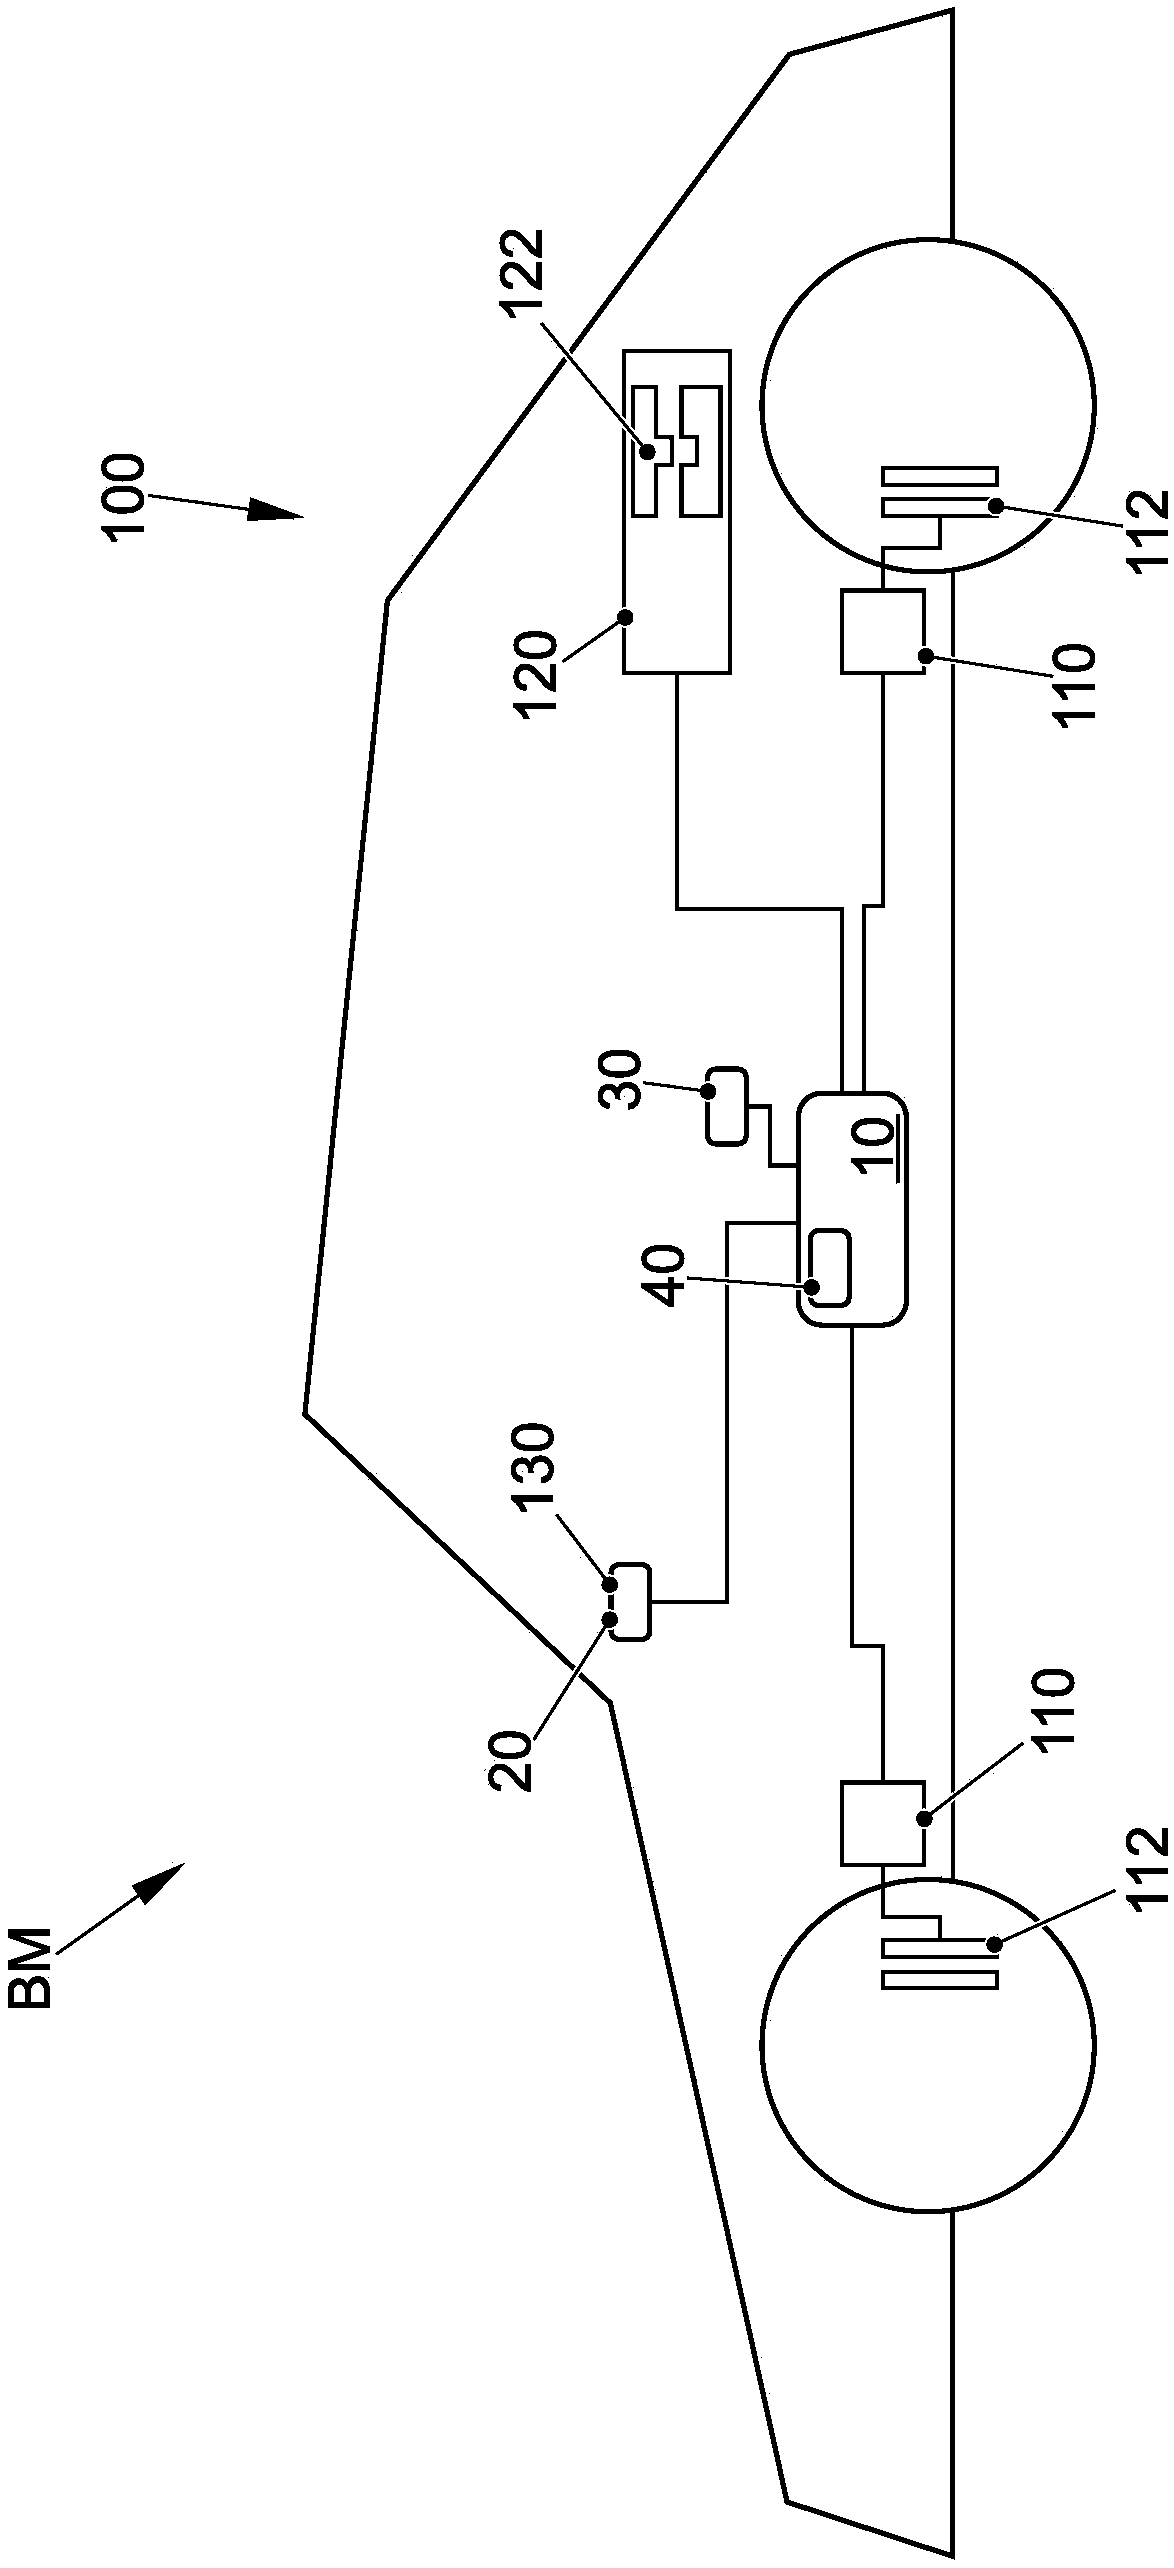 Method for controlling a parking mode of a vehicle